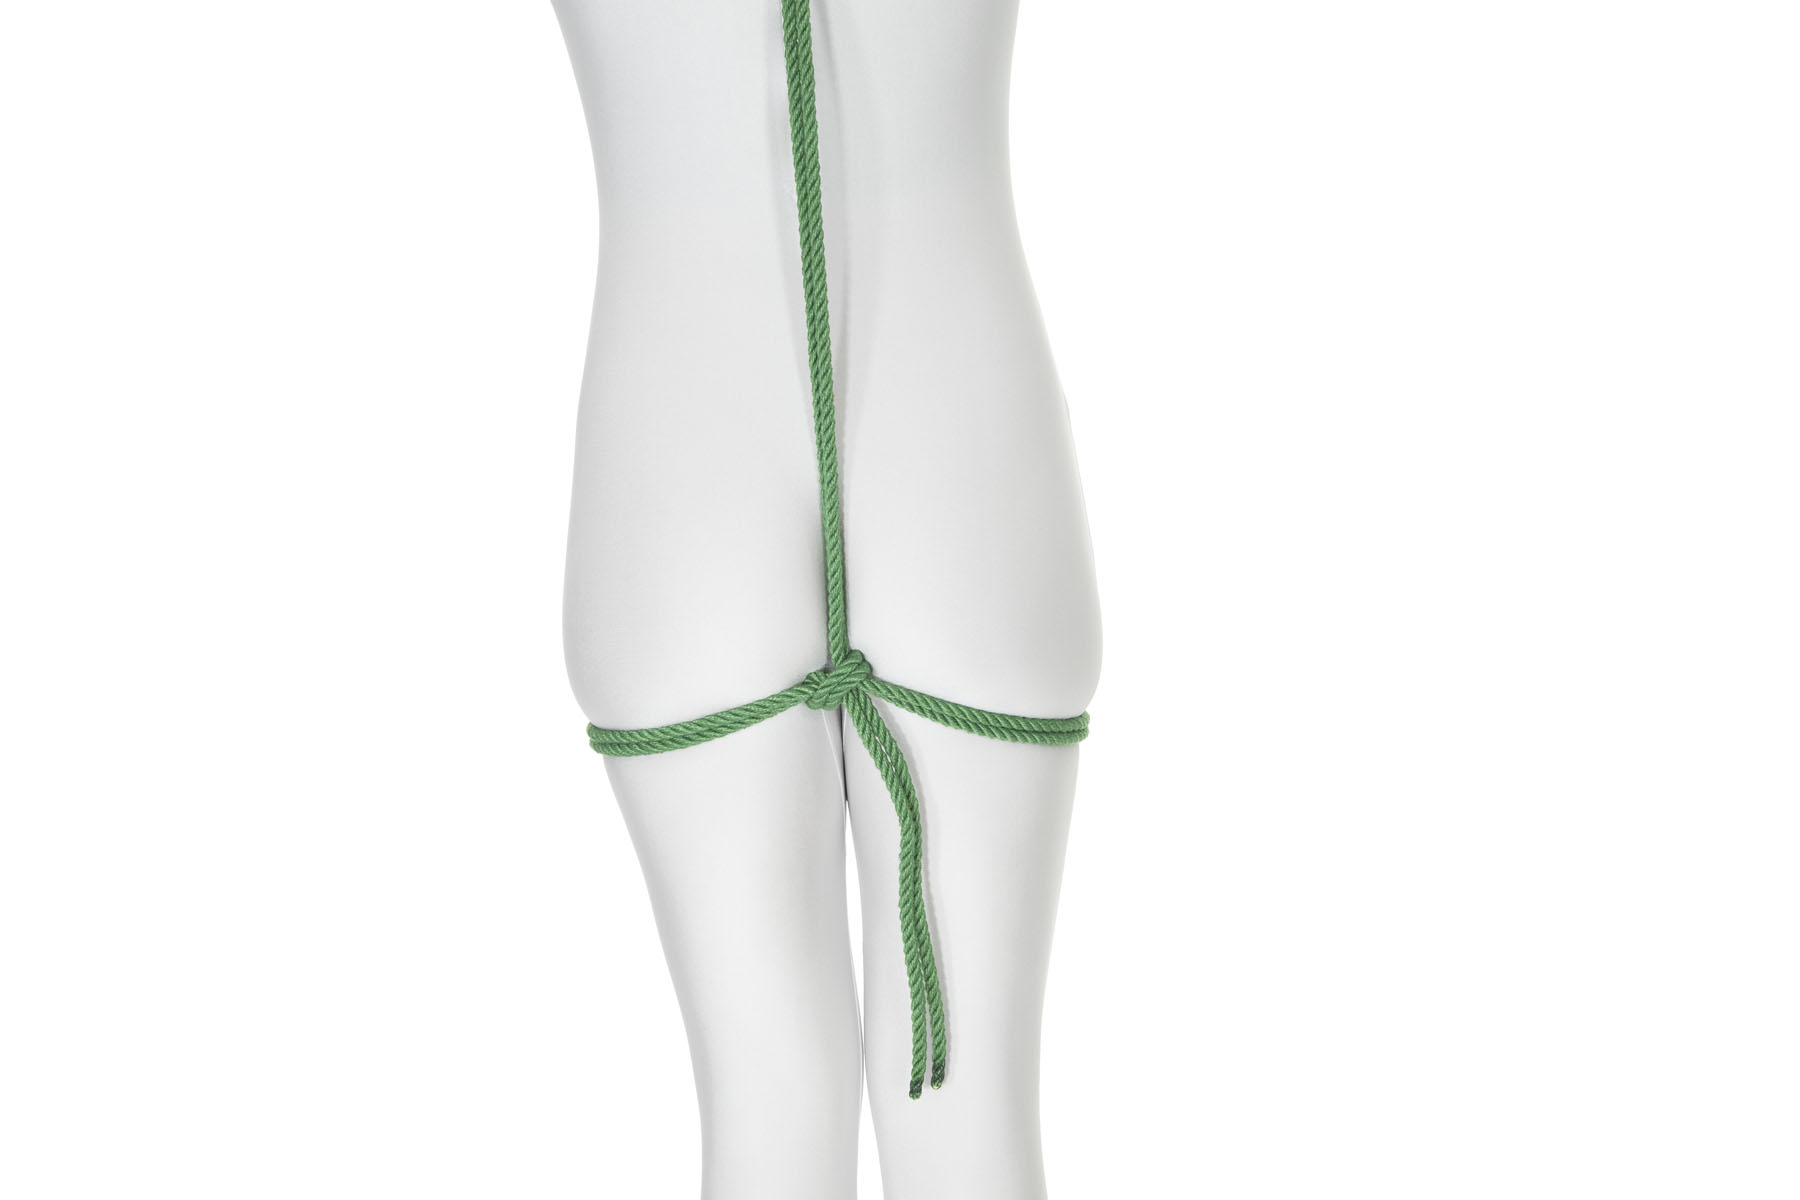 A rear view of a person. A green rope enters the frame in the upper back and goes down their body. Below the buttocks it turns right and goes all the way around the body, making a tight wrap that is held in place by the buttocks. When it gets back to the starting point, it makes a half hitch around itself.